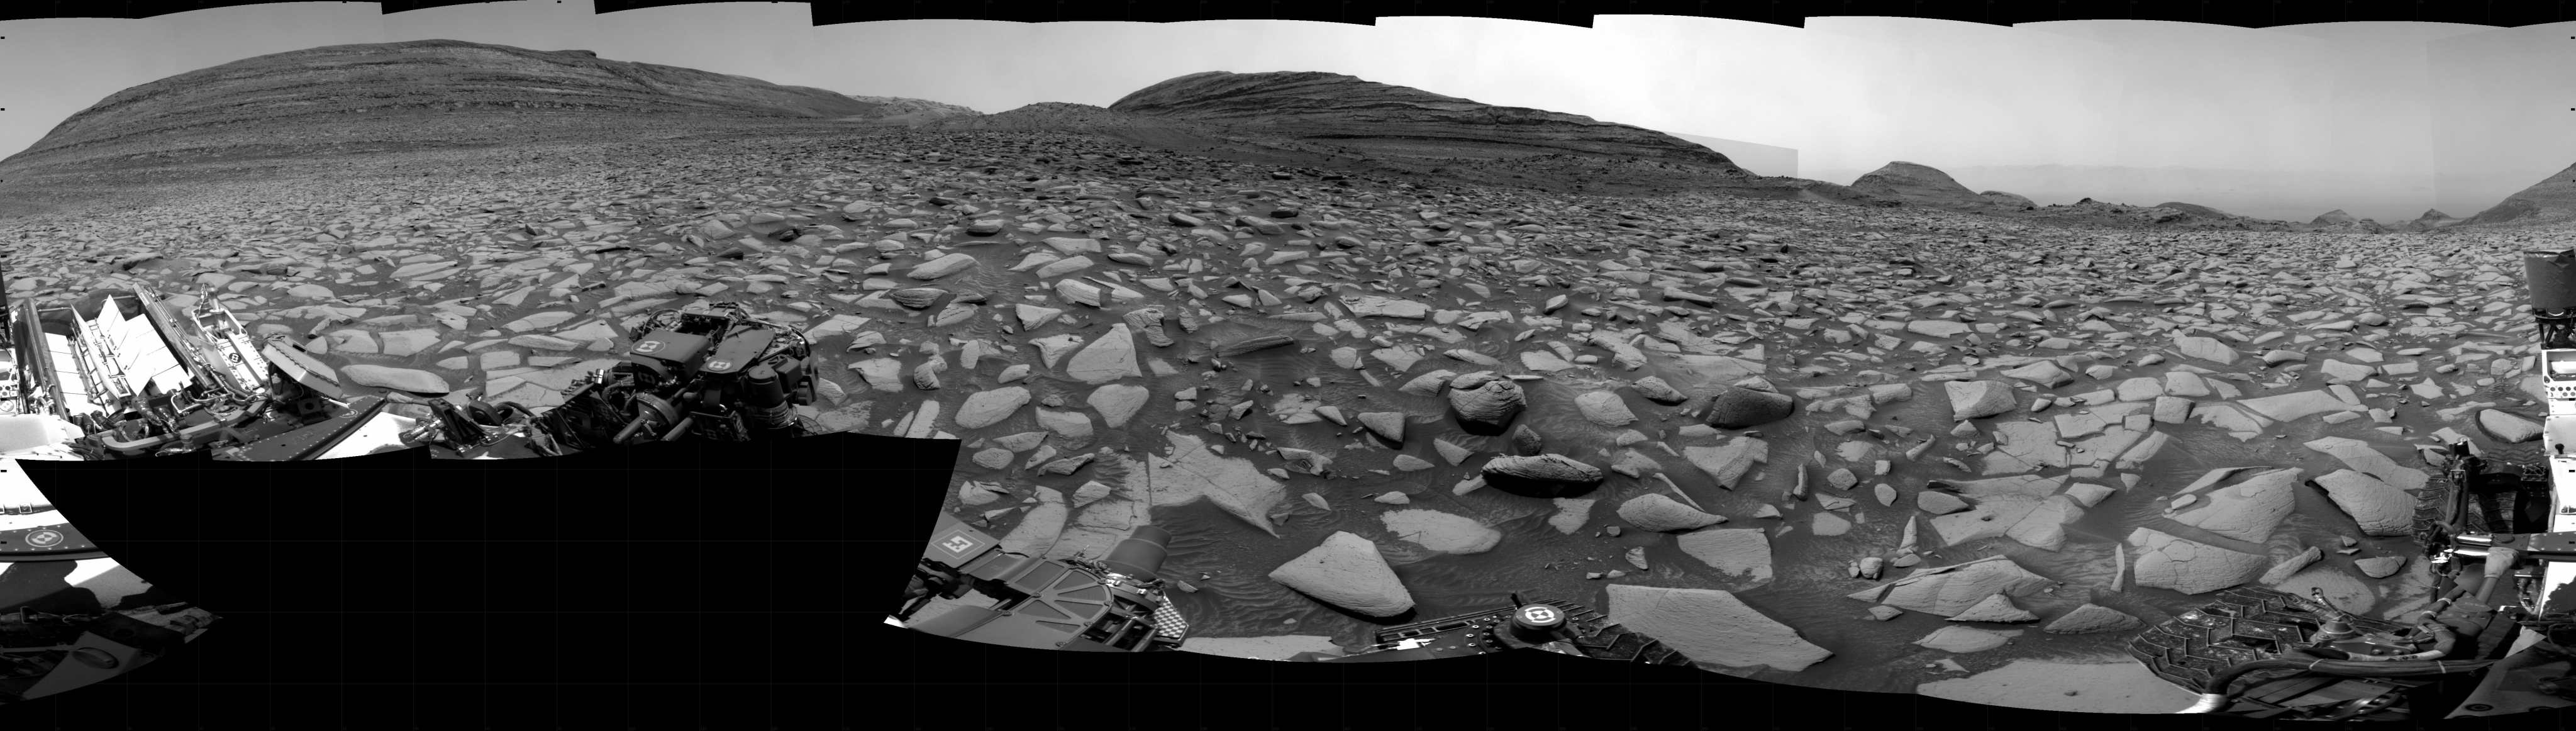 Curiosity took the images on April 10, 2024, Sol 4151 of the Mars Science Laboratory mission at drive 2116, site number 106. The local mean solar time for the image exposures was from 1 PM to 12 PM.